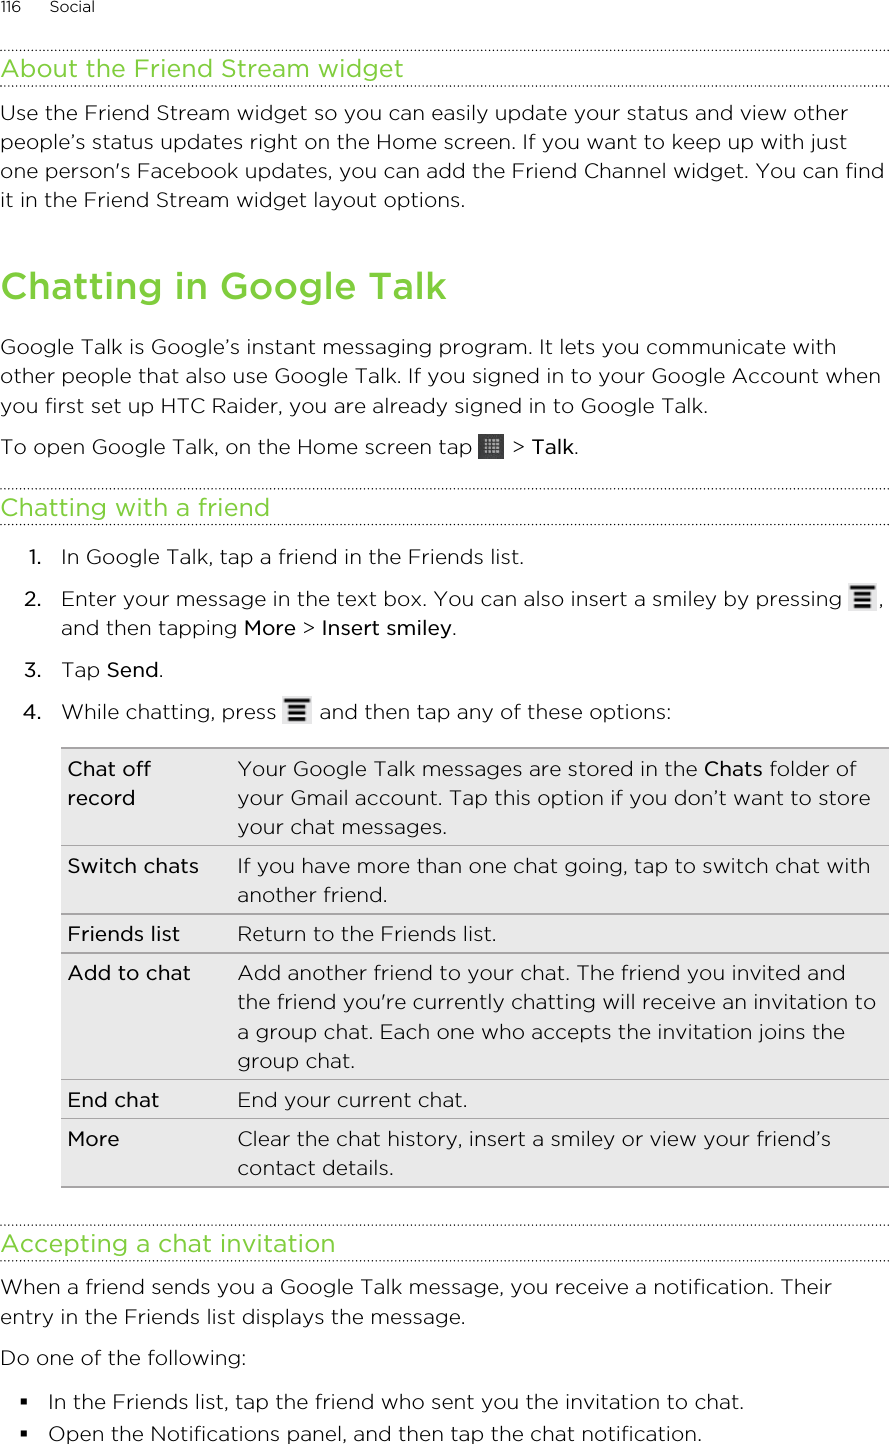 About the Friend Stream widgetUse the Friend Stream widget so you can easily update your status and view otherpeople’s status updates right on the Home screen. If you want to keep up with justone person&apos;s Facebook updates, you can add the Friend Channel widget. You can findit in the Friend Stream widget layout options.Chatting in Google TalkGoogle Talk is Google’s instant messaging program. It lets you communicate withother people that also use Google Talk. If you signed in to your Google Account whenyou first set up HTC Raider, you are already signed in to Google Talk.To open Google Talk, on the Home screen tap   &gt; Talk.Chatting with a friend1. In Google Talk, tap a friend in the Friends list.2. Enter your message in the text box. You can also insert a smiley by pressing  ,and then tapping More &gt; Insert smiley.3. Tap Send.4. While chatting, press   and then tap any of these options:Chat offrecordYour Google Talk messages are stored in the Chats folder ofyour Gmail account. Tap this option if you don’t want to storeyour chat messages.Switch chats If you have more than one chat going, tap to switch chat withanother friend.Friends list Return to the Friends list.Add to chat Add another friend to your chat. The friend you invited andthe friend you&apos;re currently chatting will receive an invitation toa group chat. Each one who accepts the invitation joins thegroup chat.End chat End your current chat.More Clear the chat history, insert a smiley or view your friend’scontact details.Accepting a chat invitationWhen a friend sends you a Google Talk message, you receive a notification. Theirentry in the Friends list displays the message.Do one of the following:§In the Friends list, tap the friend who sent you the invitation to chat.§Open the Notifications panel, and then tap the chat notification.116 Social